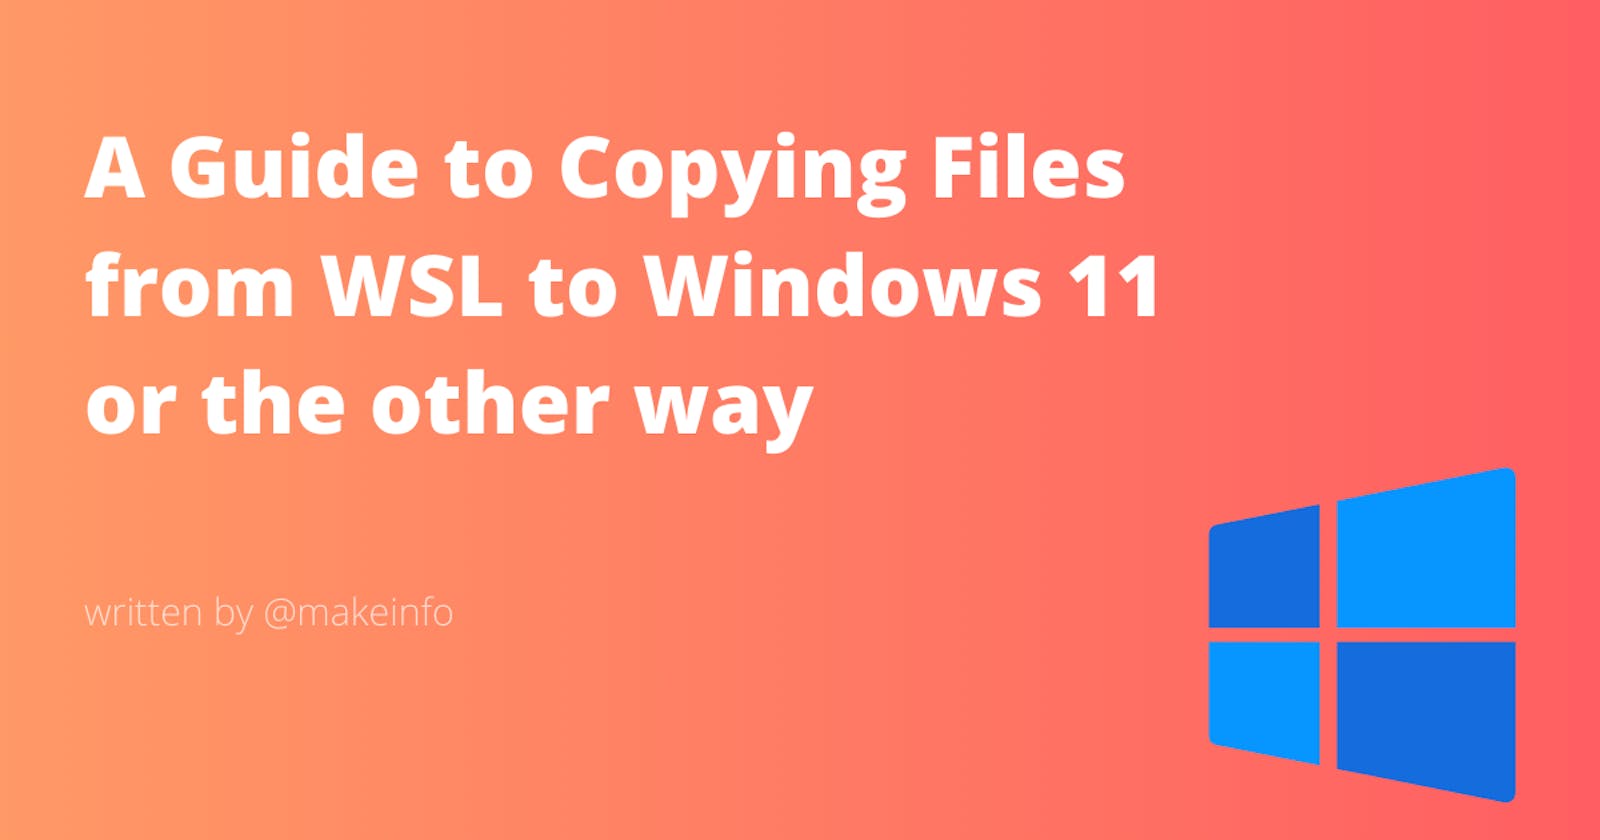 A Guide to Copying Files from WSL to Windows 11 or the other way